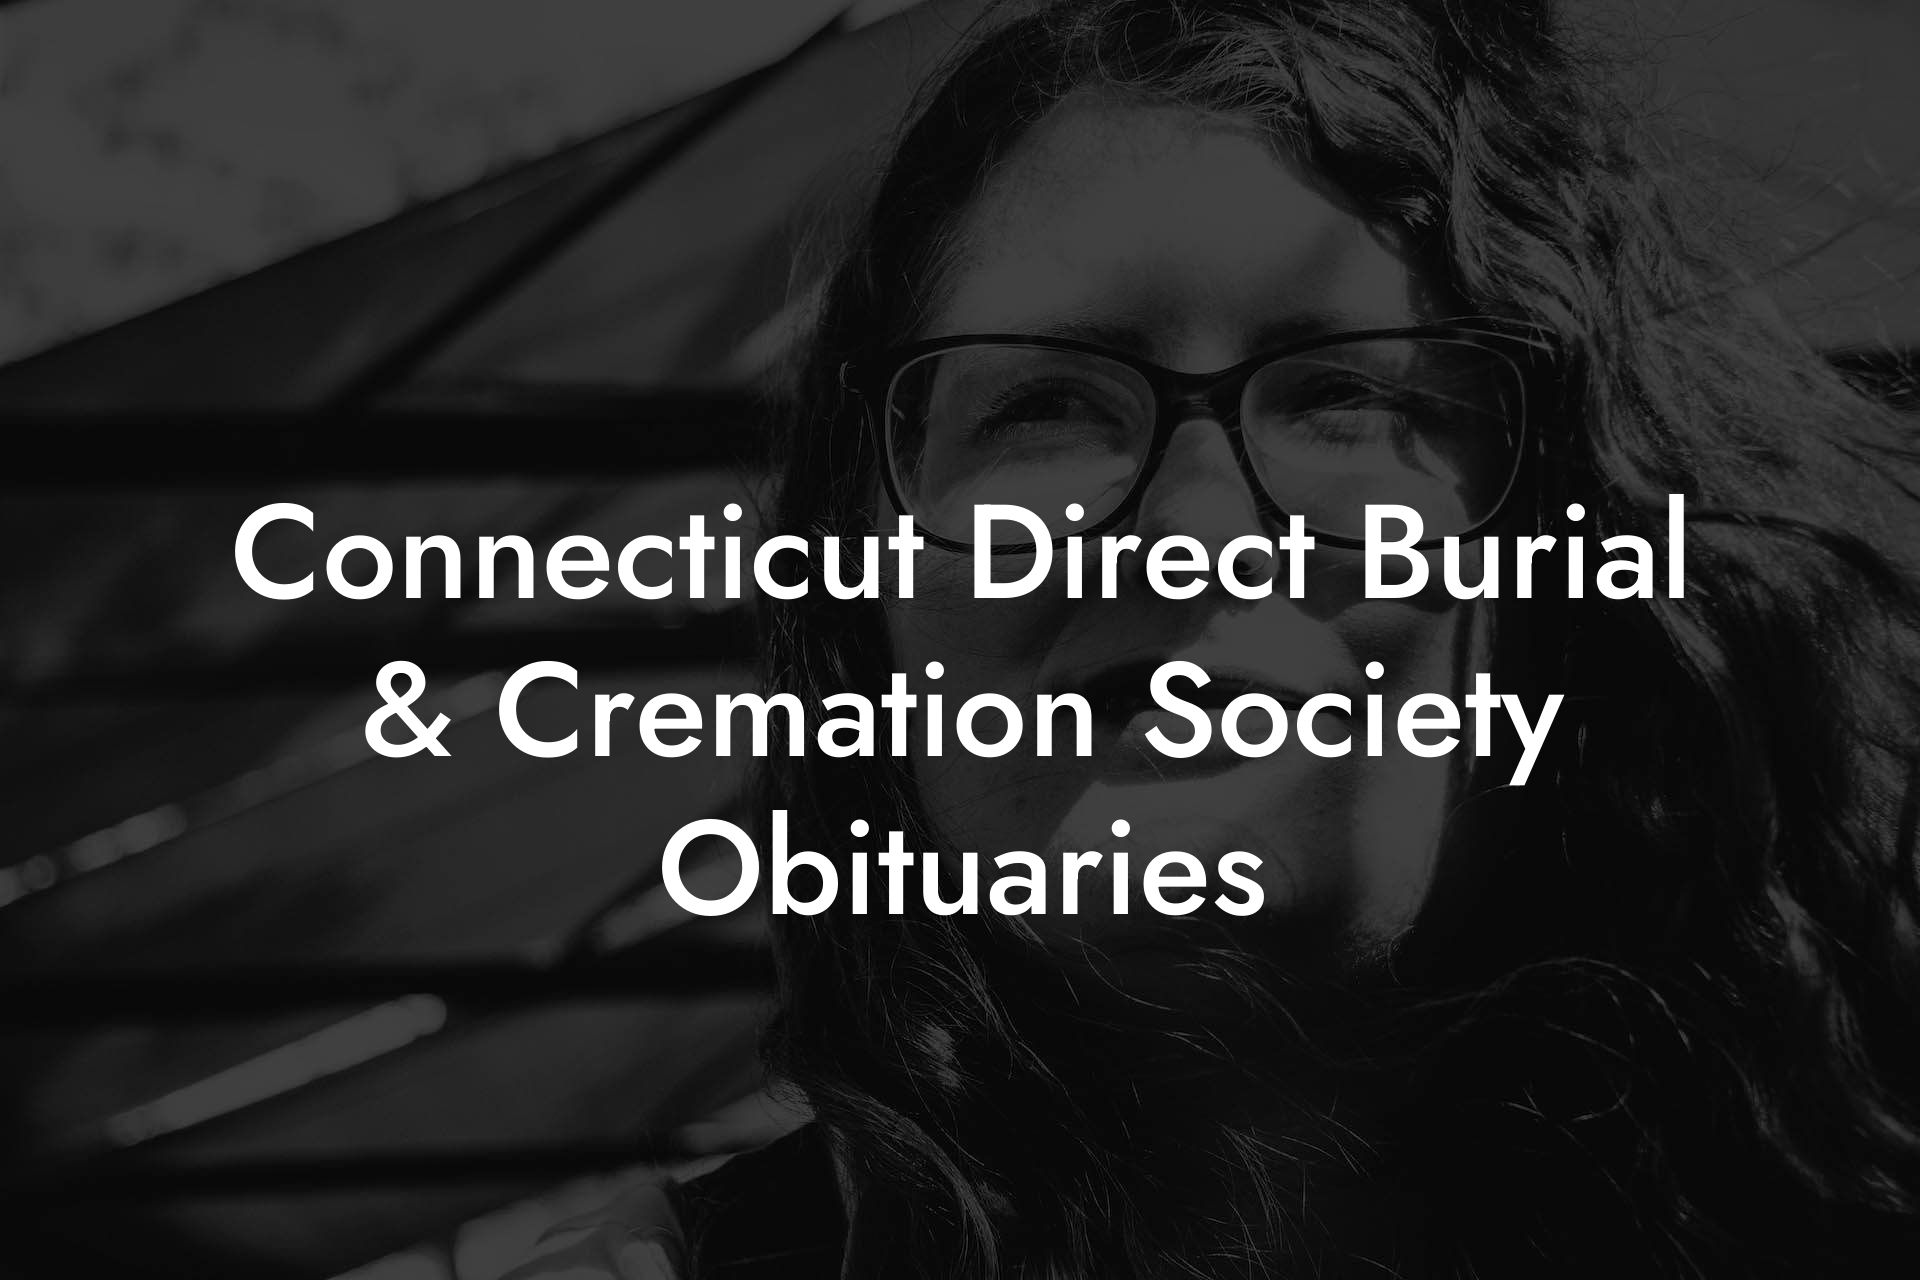 Connecticut Direct Burial & Cremation Society Obituaries